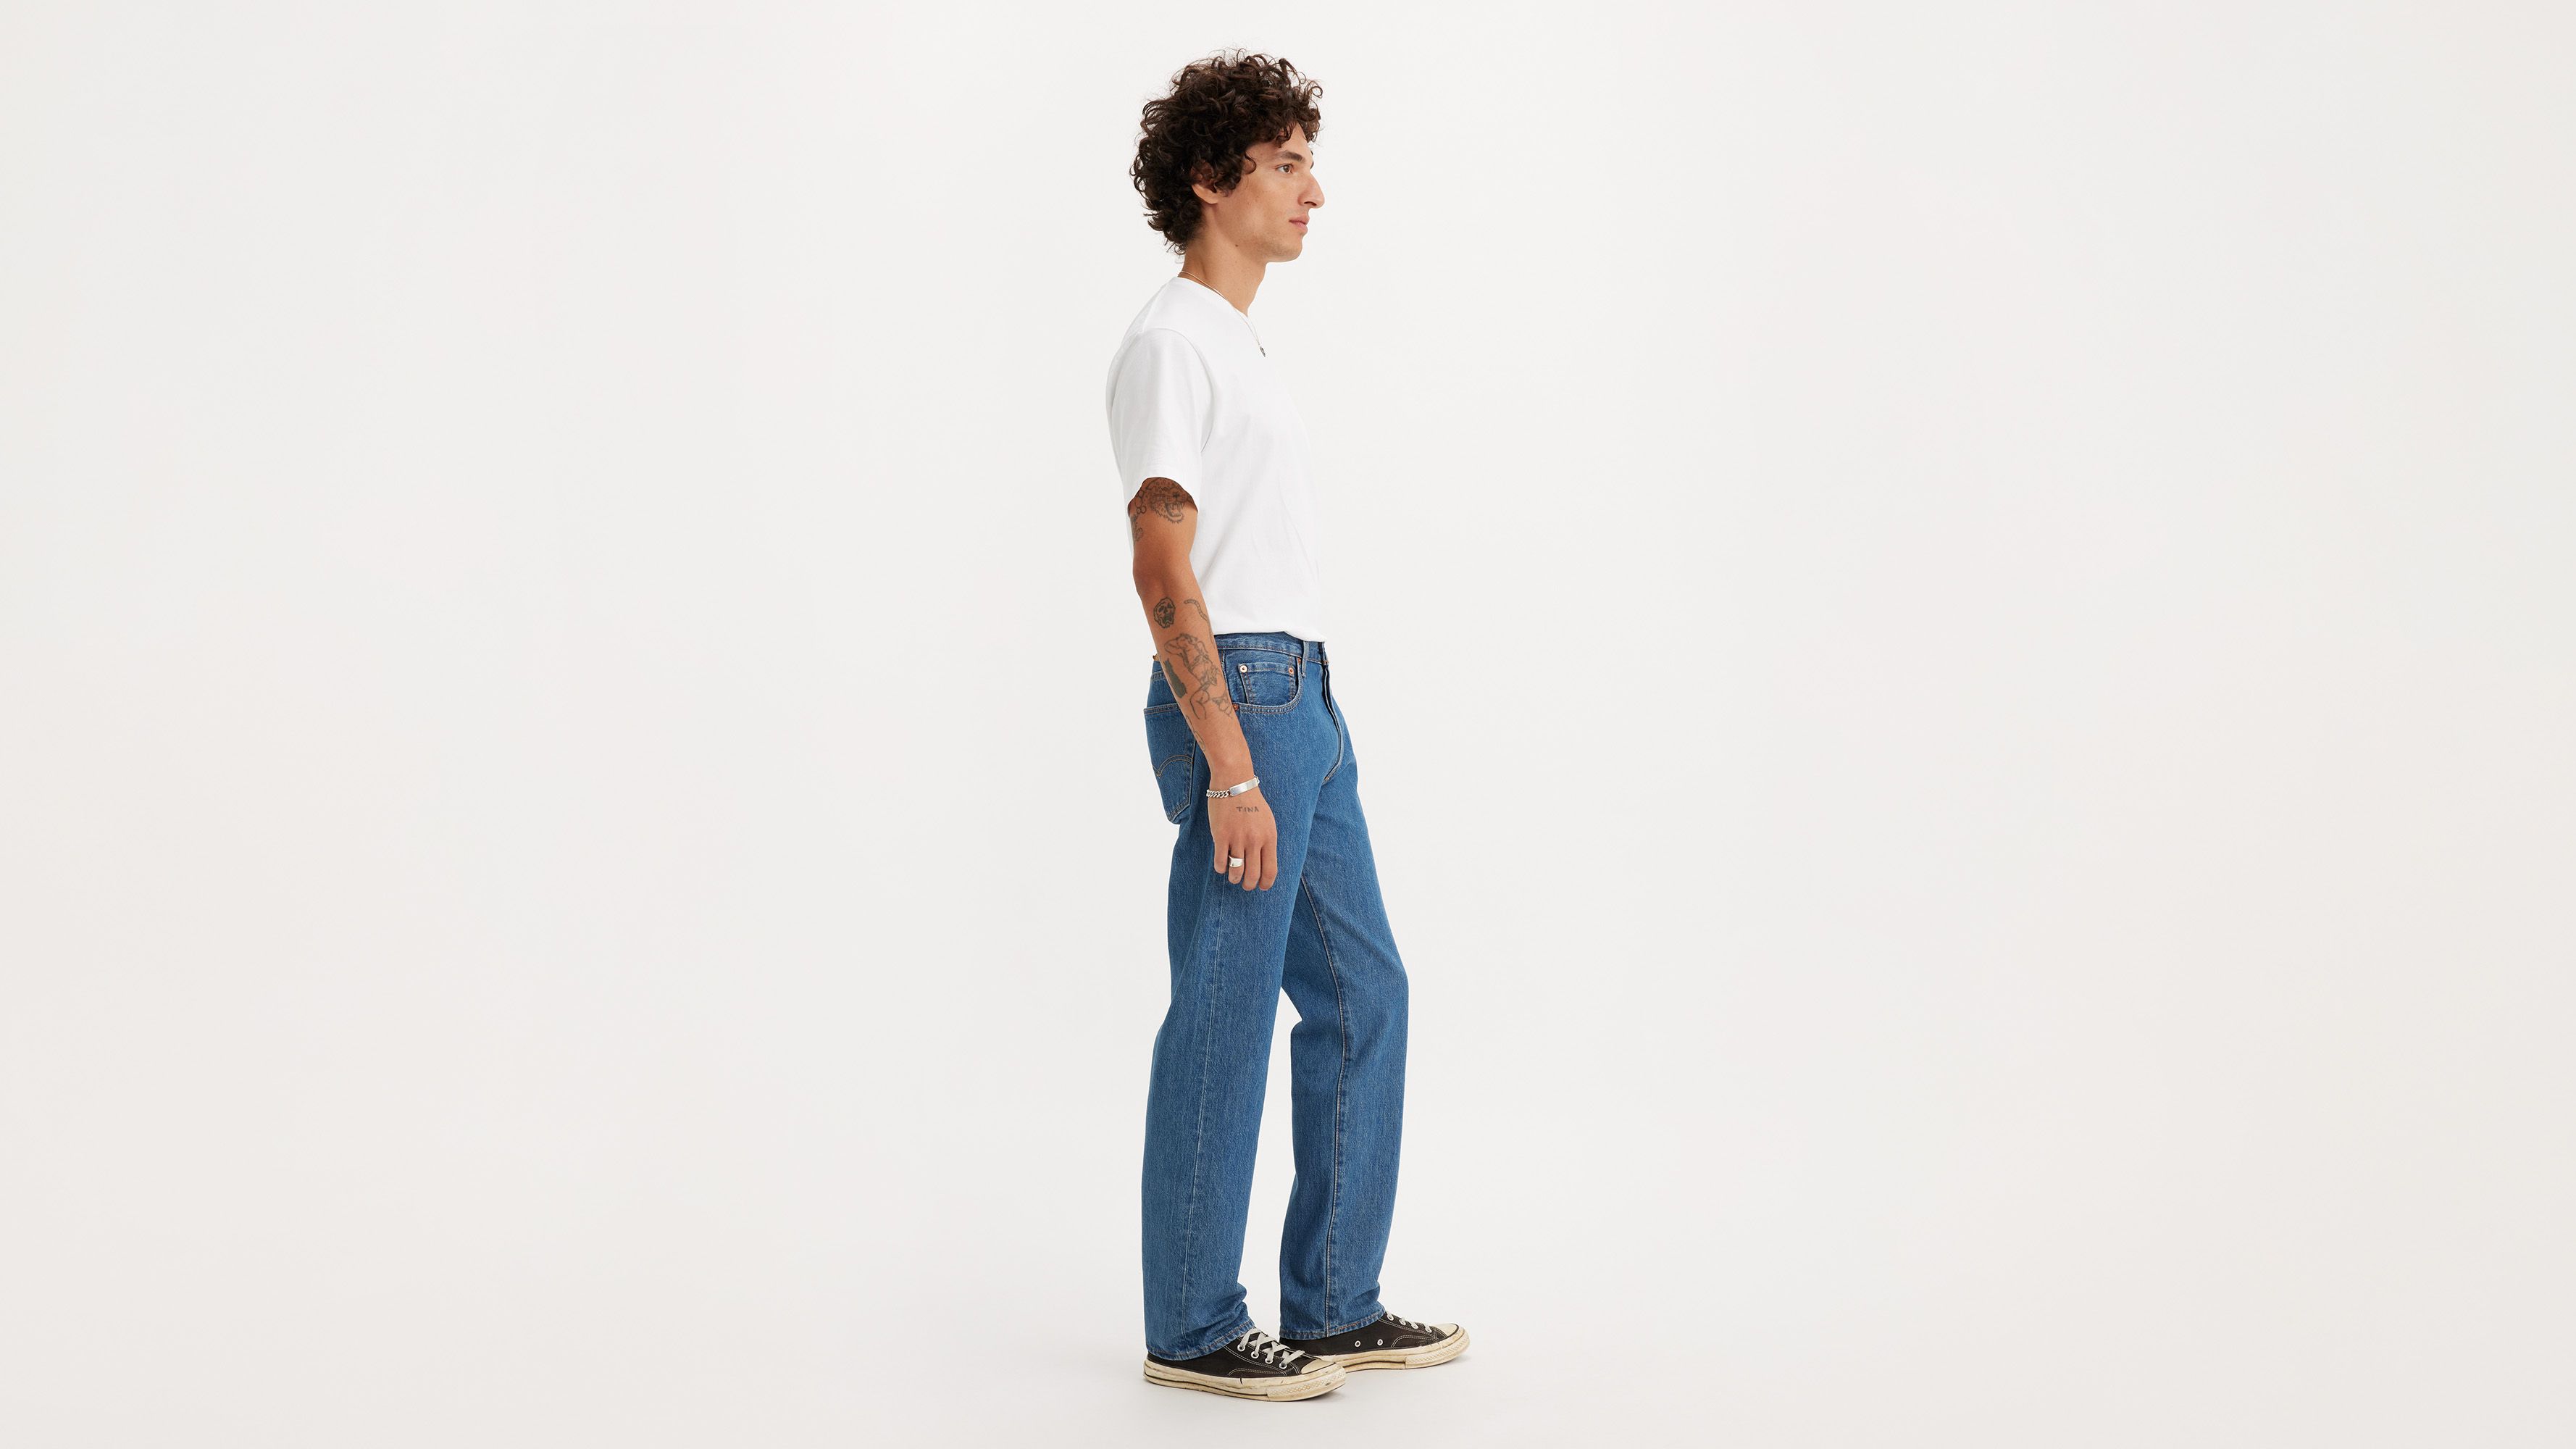 levis 501 jeans mens button fly stonewashed